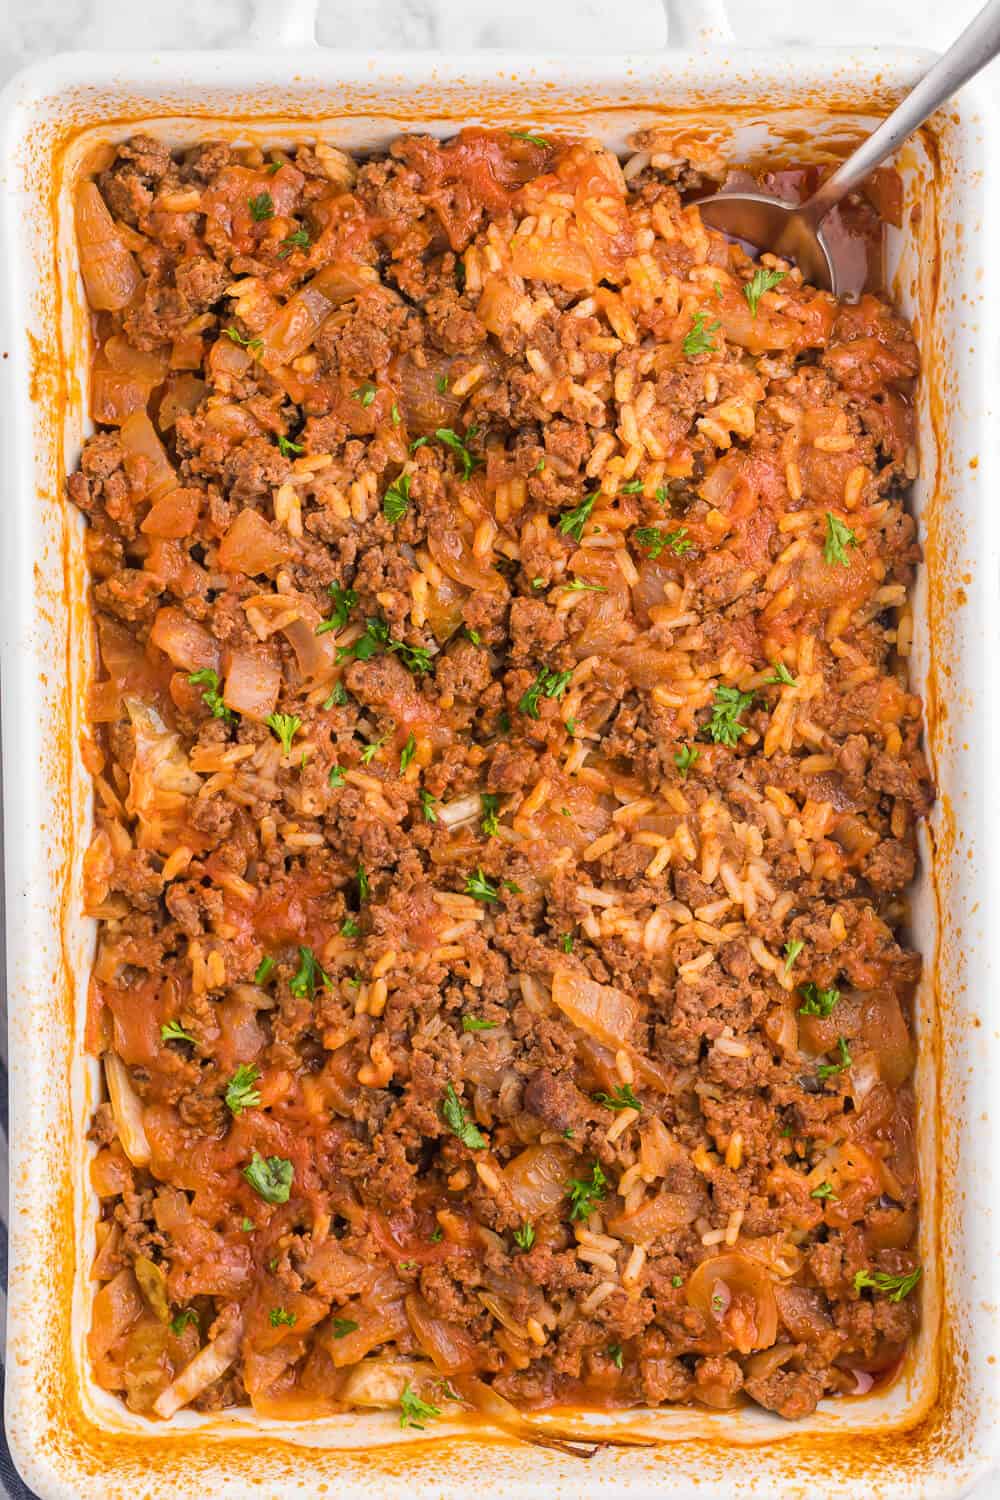 Cabbage roll casserole in a casserole dish with a serving spoon.